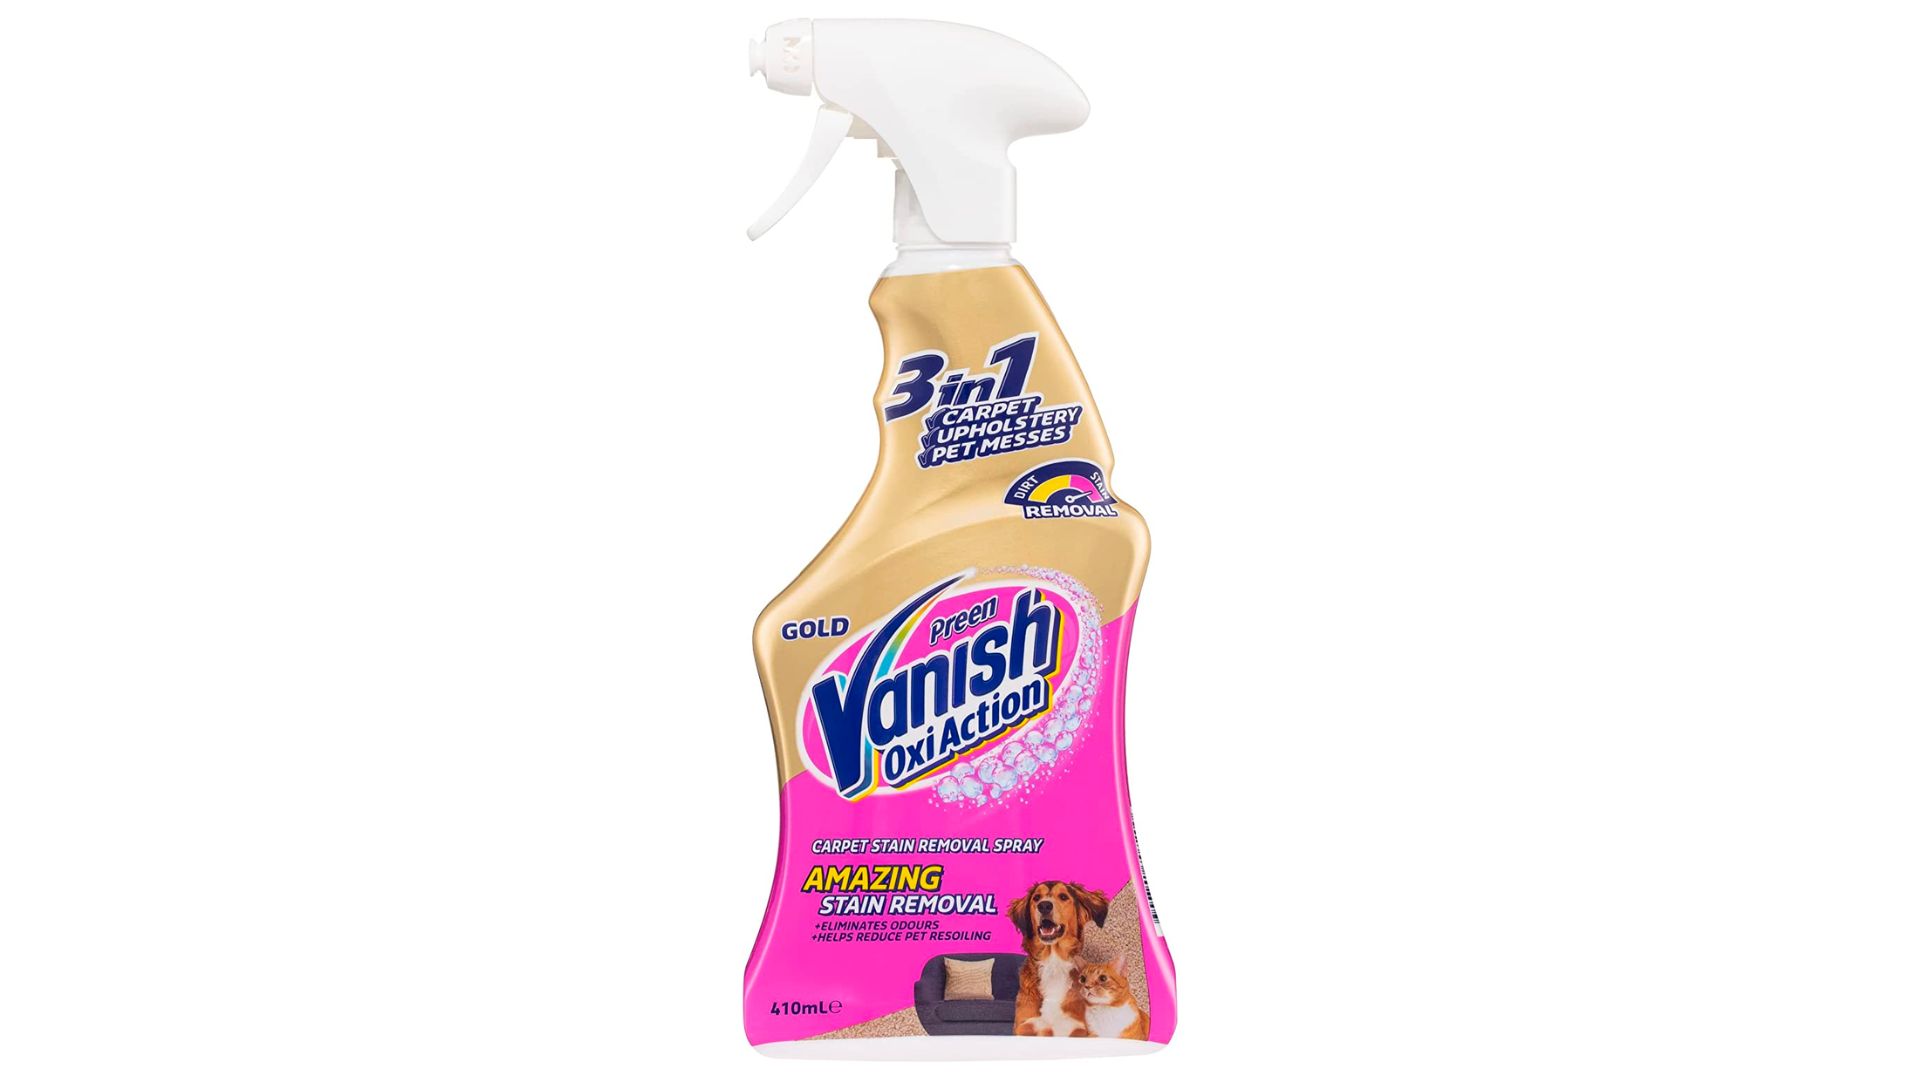 Vanish Gold Oxi Action. A hands-on mum review